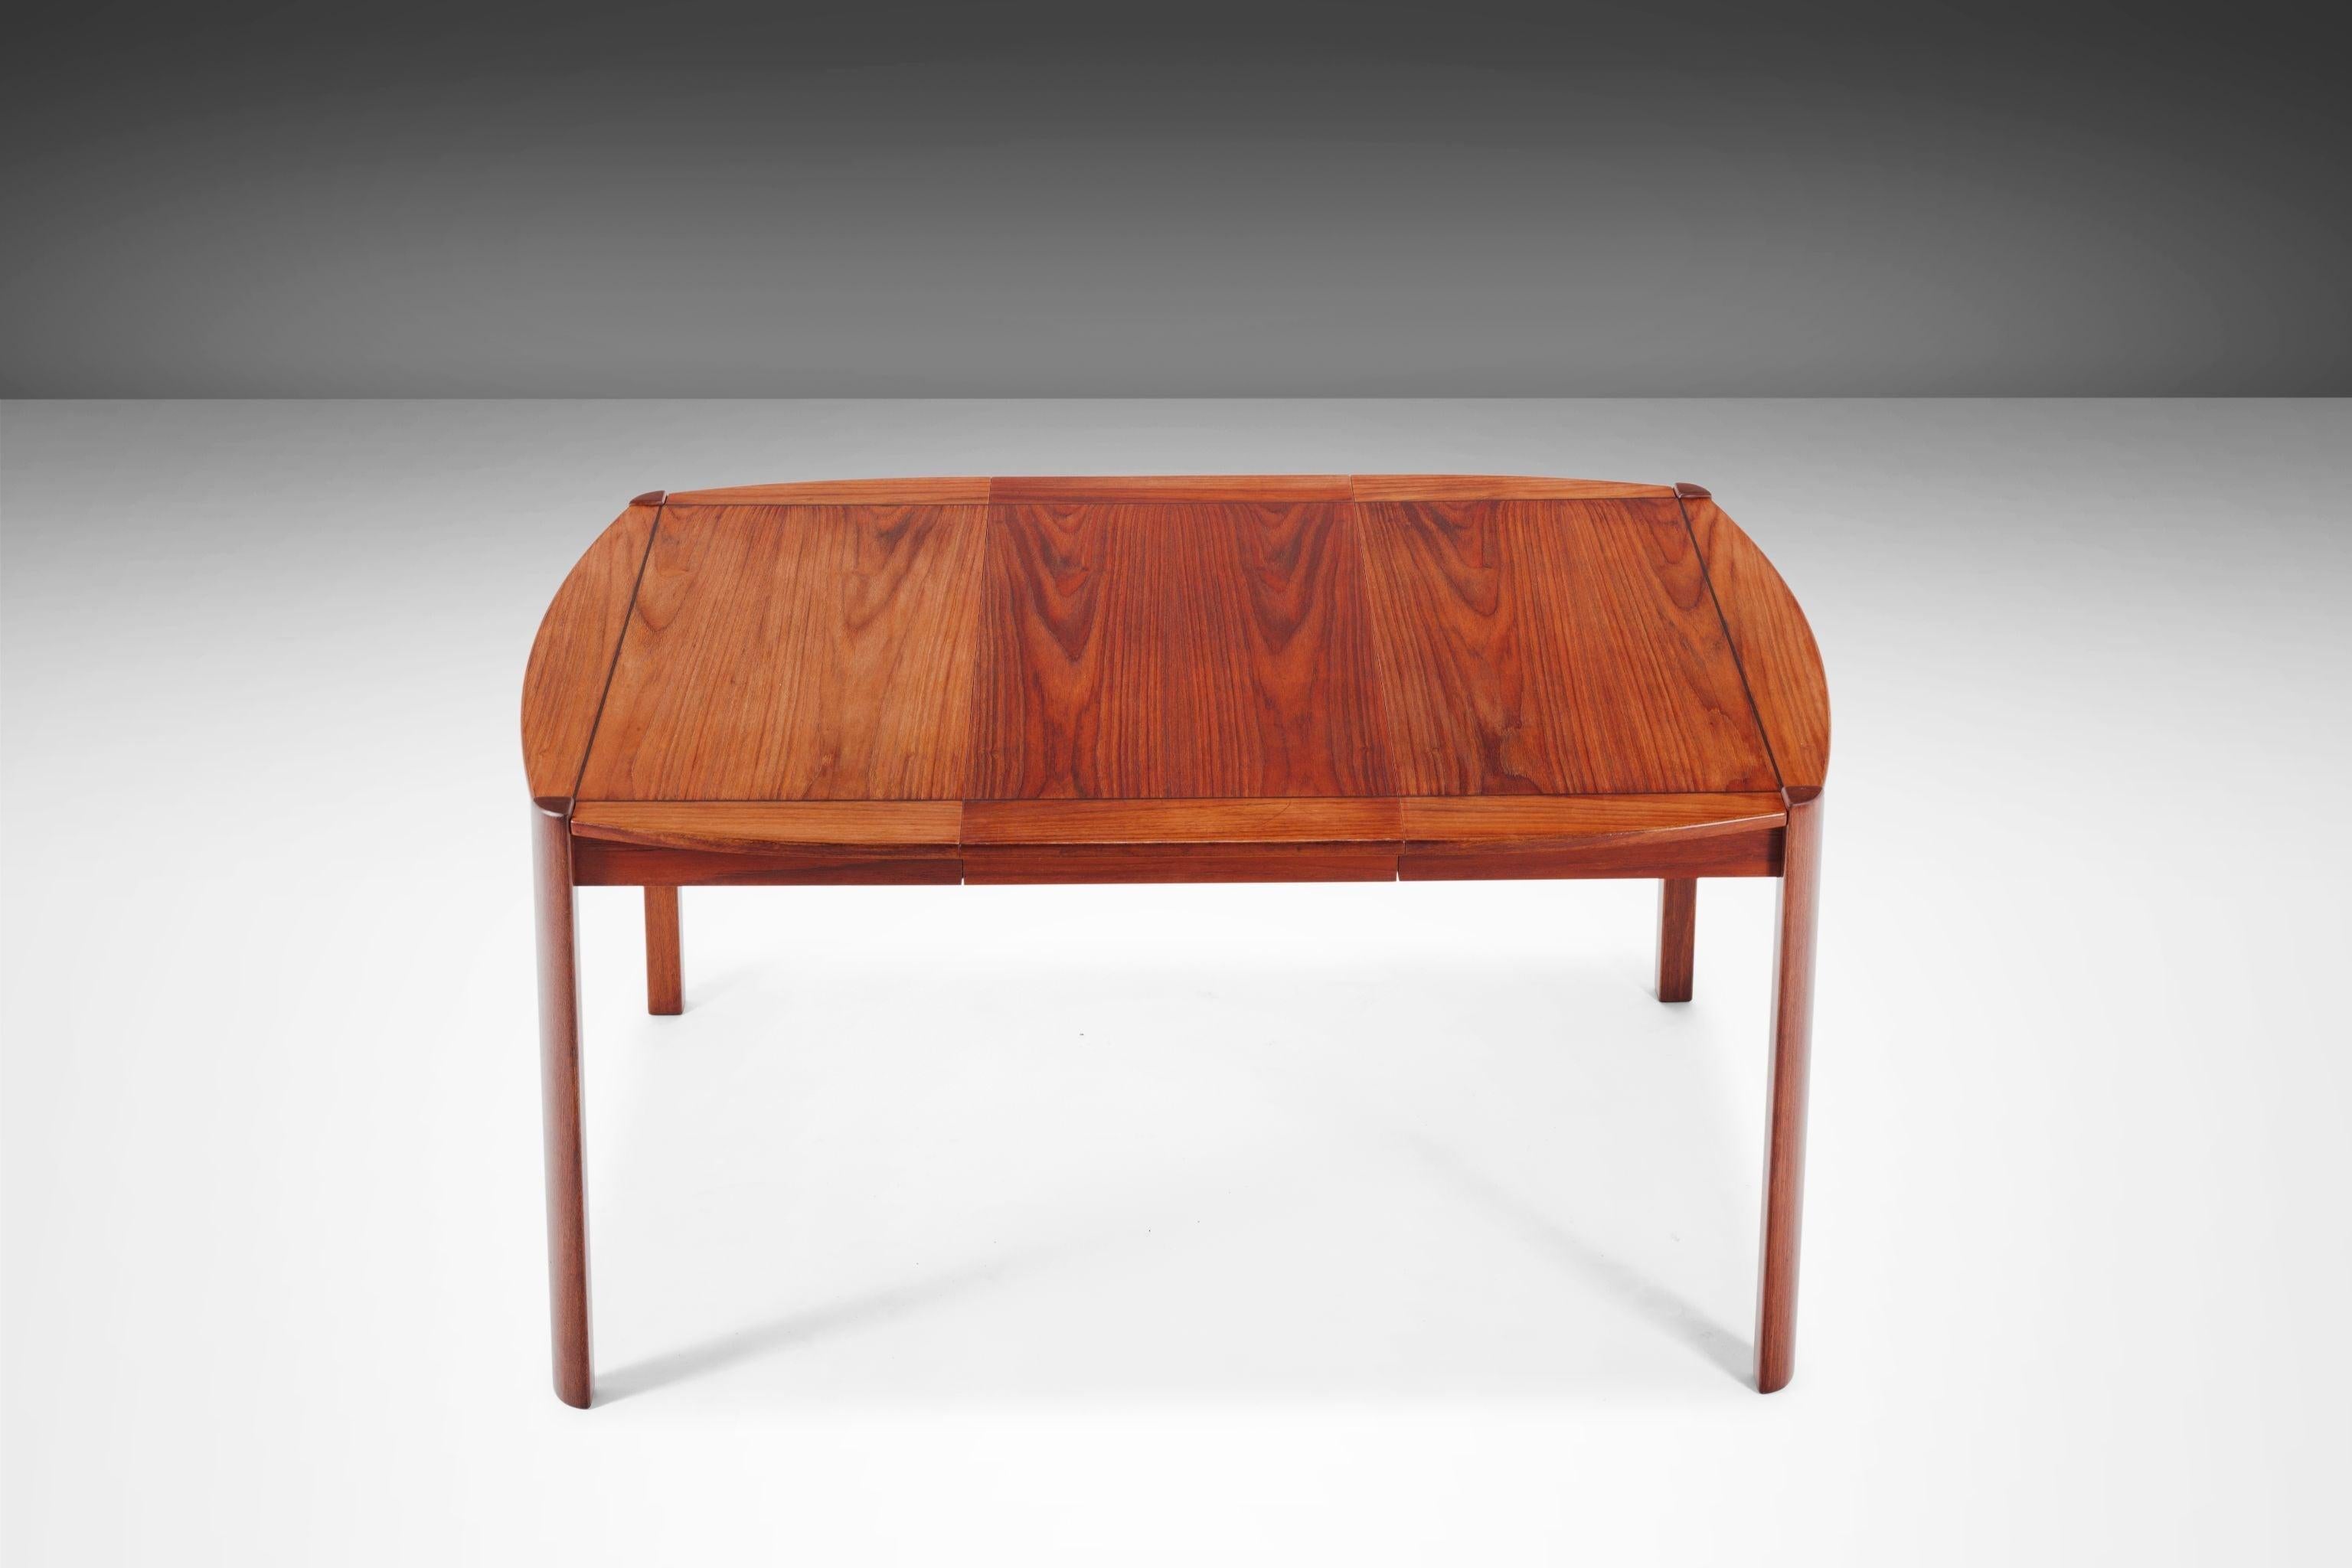 Exquisite Danish Modern Extension Dining Table in Teak, Denmark, c. 1960's In Good Condition For Sale In Deland, FL